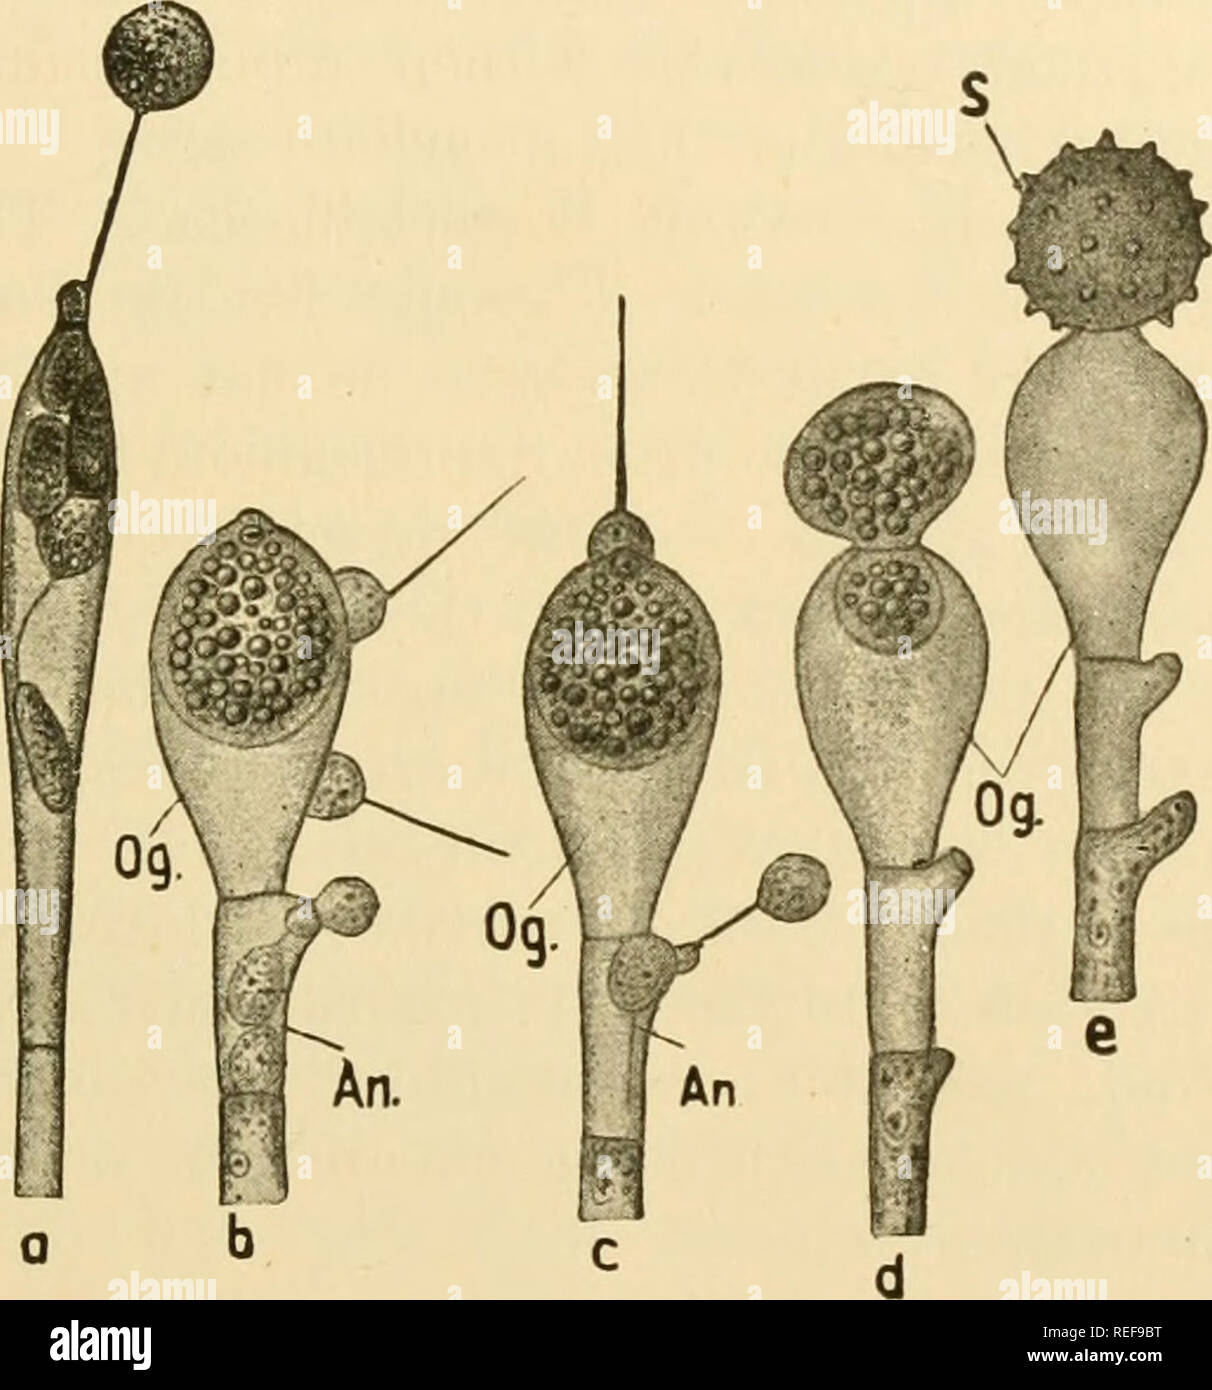 . Comparative morphology of Fungi. Fungi. OOMYCETES 55 tions, M. brachyandra forms moniliform gemmae with thick, brownish walls. Reproduction takes place by zoospores and oogonia with antheri- dia (Thaxter, 1895; Lagerheim, 1899; Woronin, 1904; Laibach, 1926). The zoospores develop as follows: In the upper, often somewhat thickened part of a hypha, protoplasm with numerous nuclei collects, and is abjointed from the vacuolate portion. By its cleavage, there are formed one or two series of uninucleate zoospore initials which become zoospores in an unknown manner and swarm through an opening at t Stock Photo